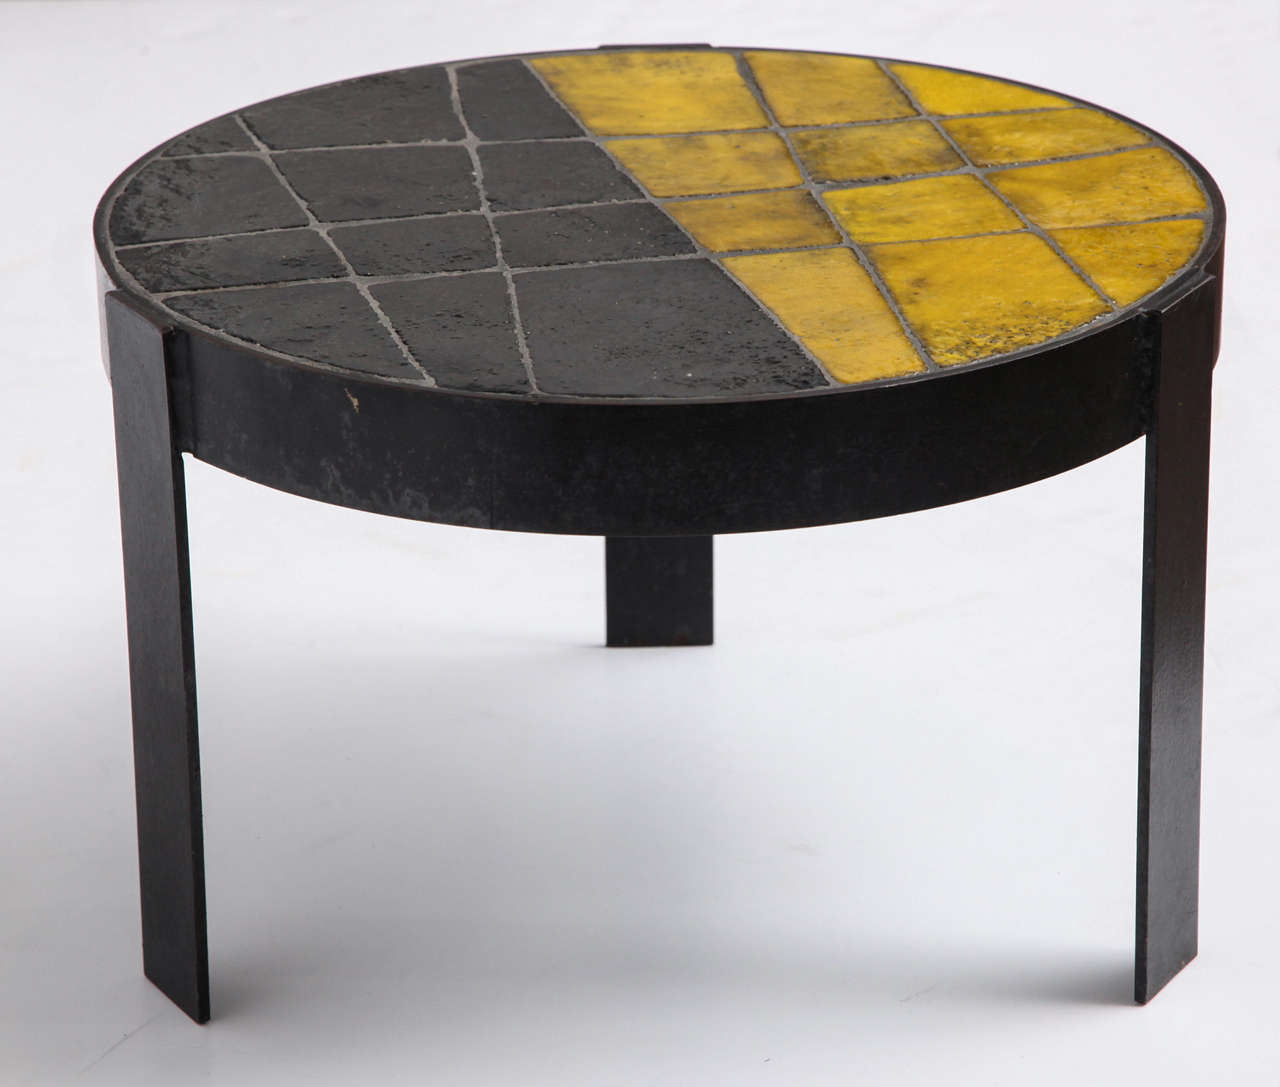 Glazed ceramic tile top table with patinated steel base